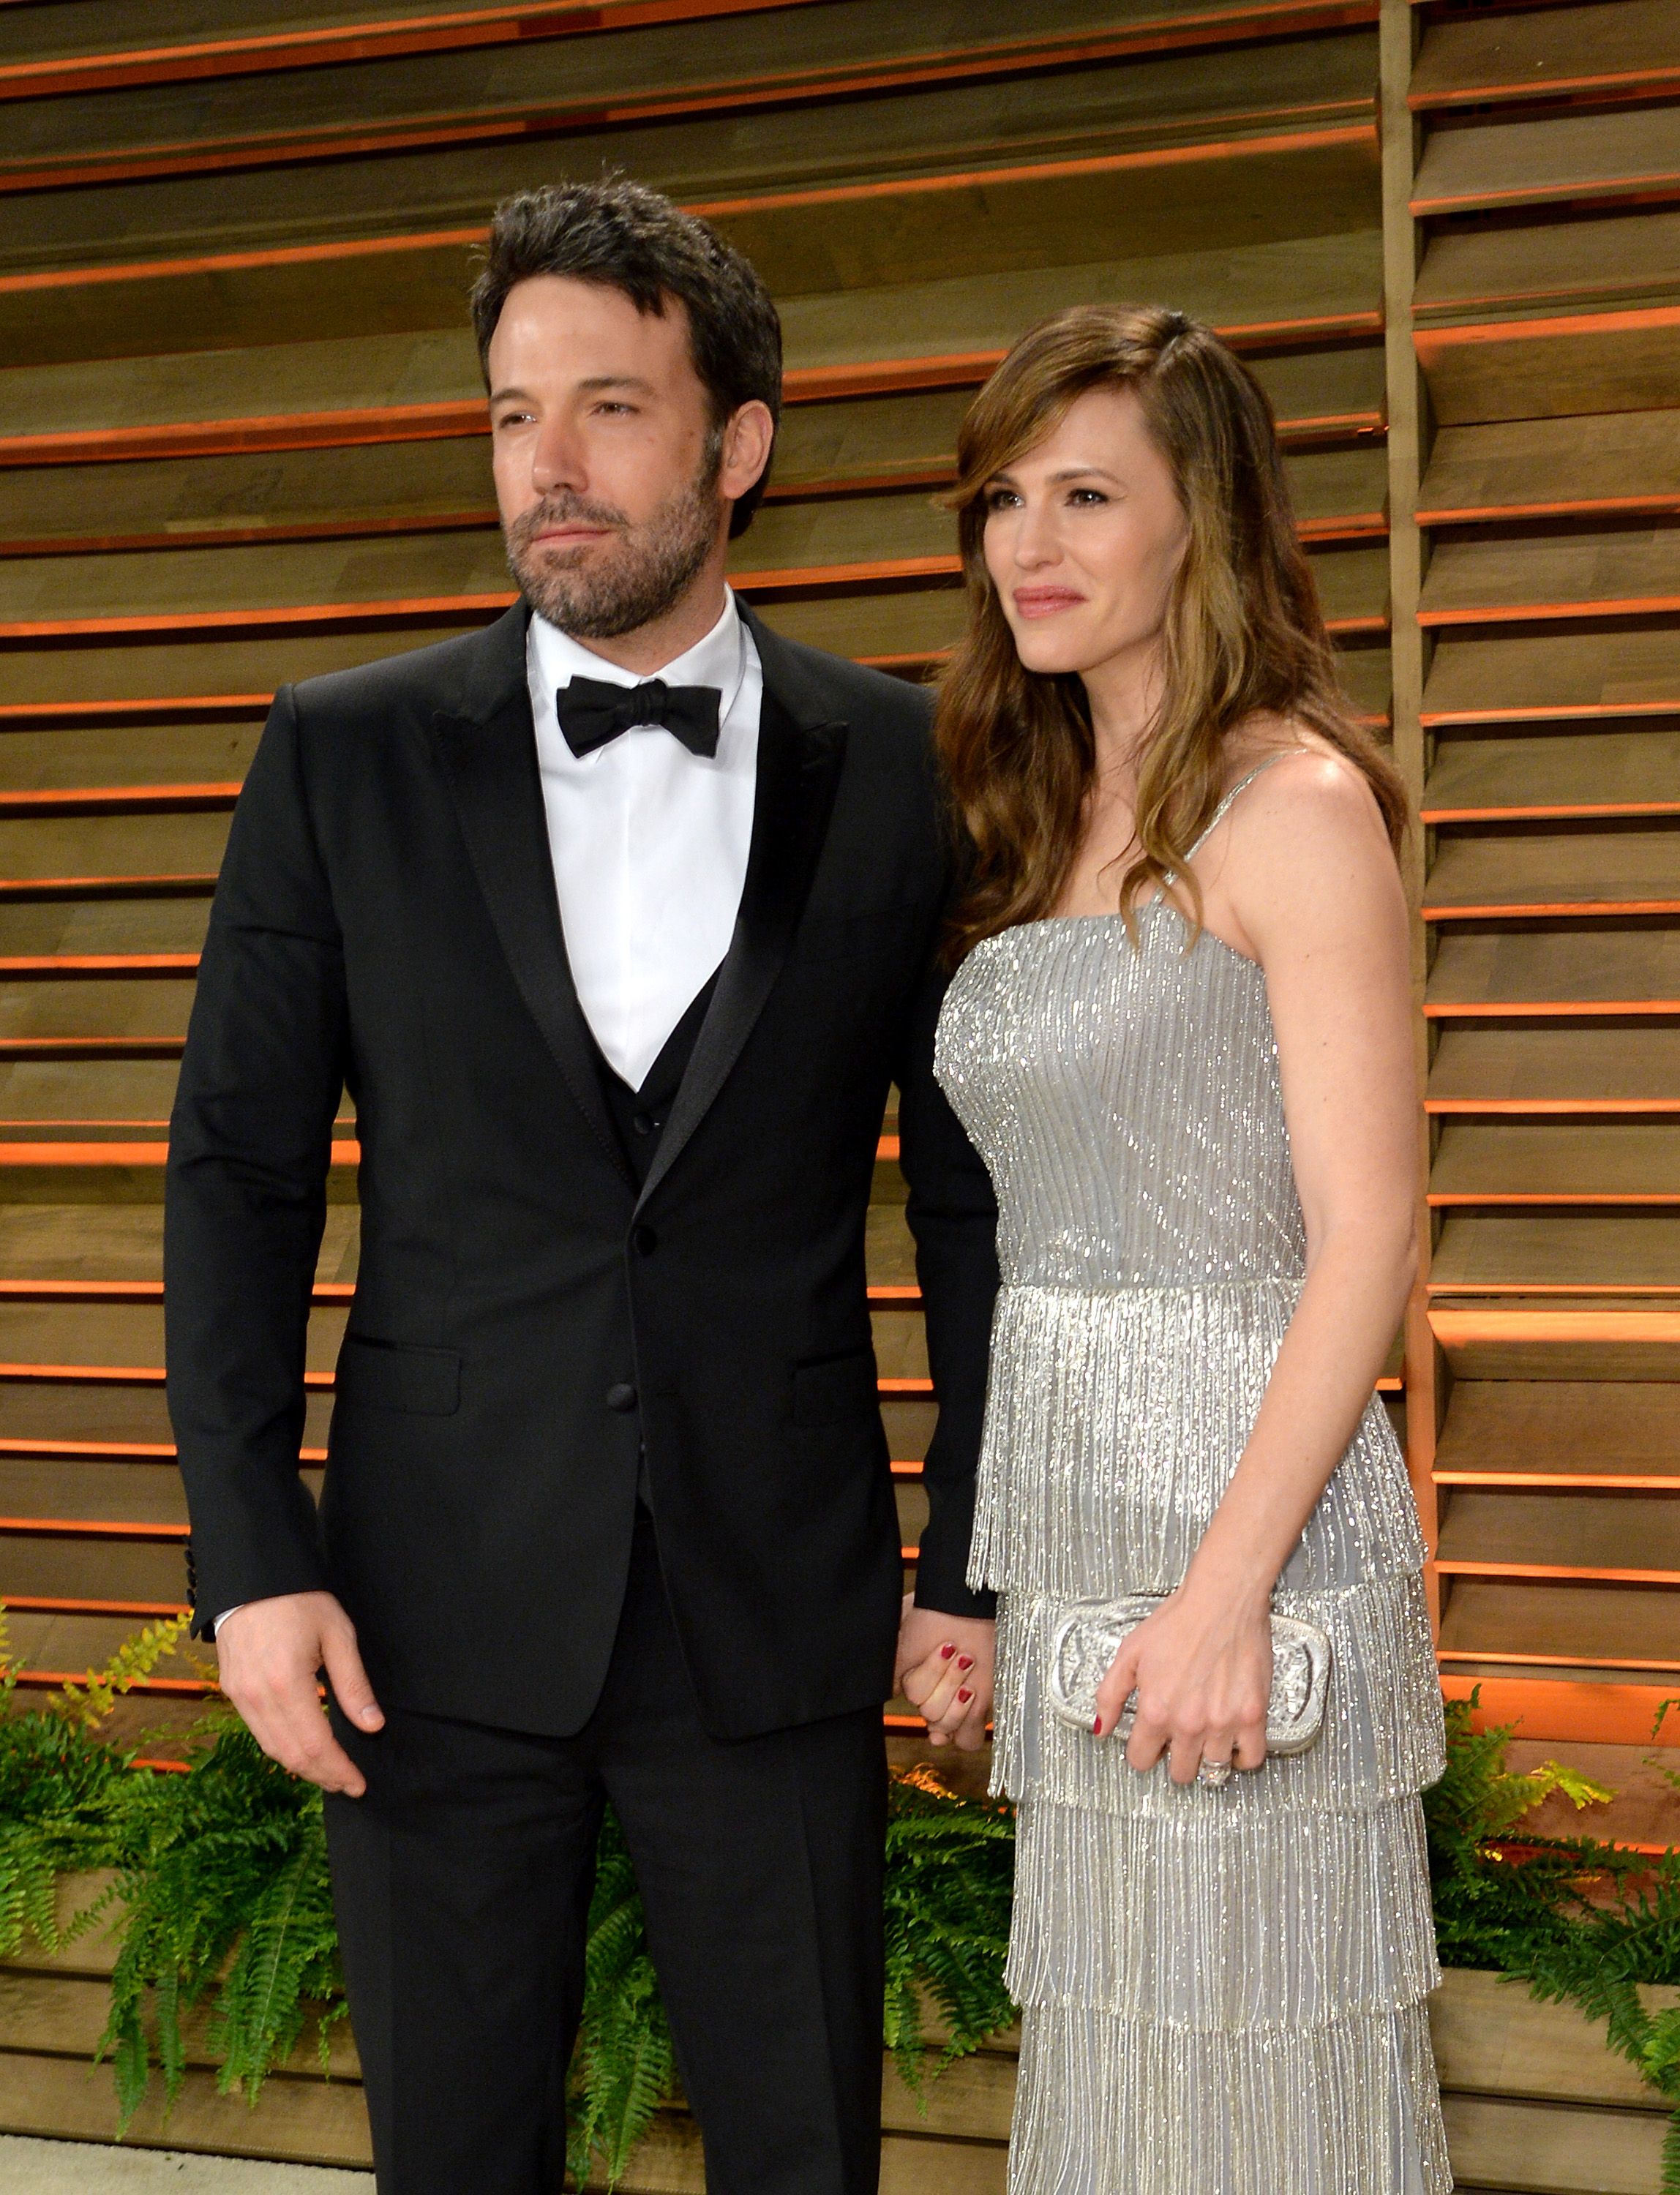 Ben Affleck and Jennifer Garner at the Vanity Fair Oscar Party Hosted By Graydon Carter on March 2, 2014 | Photo: Getty Images